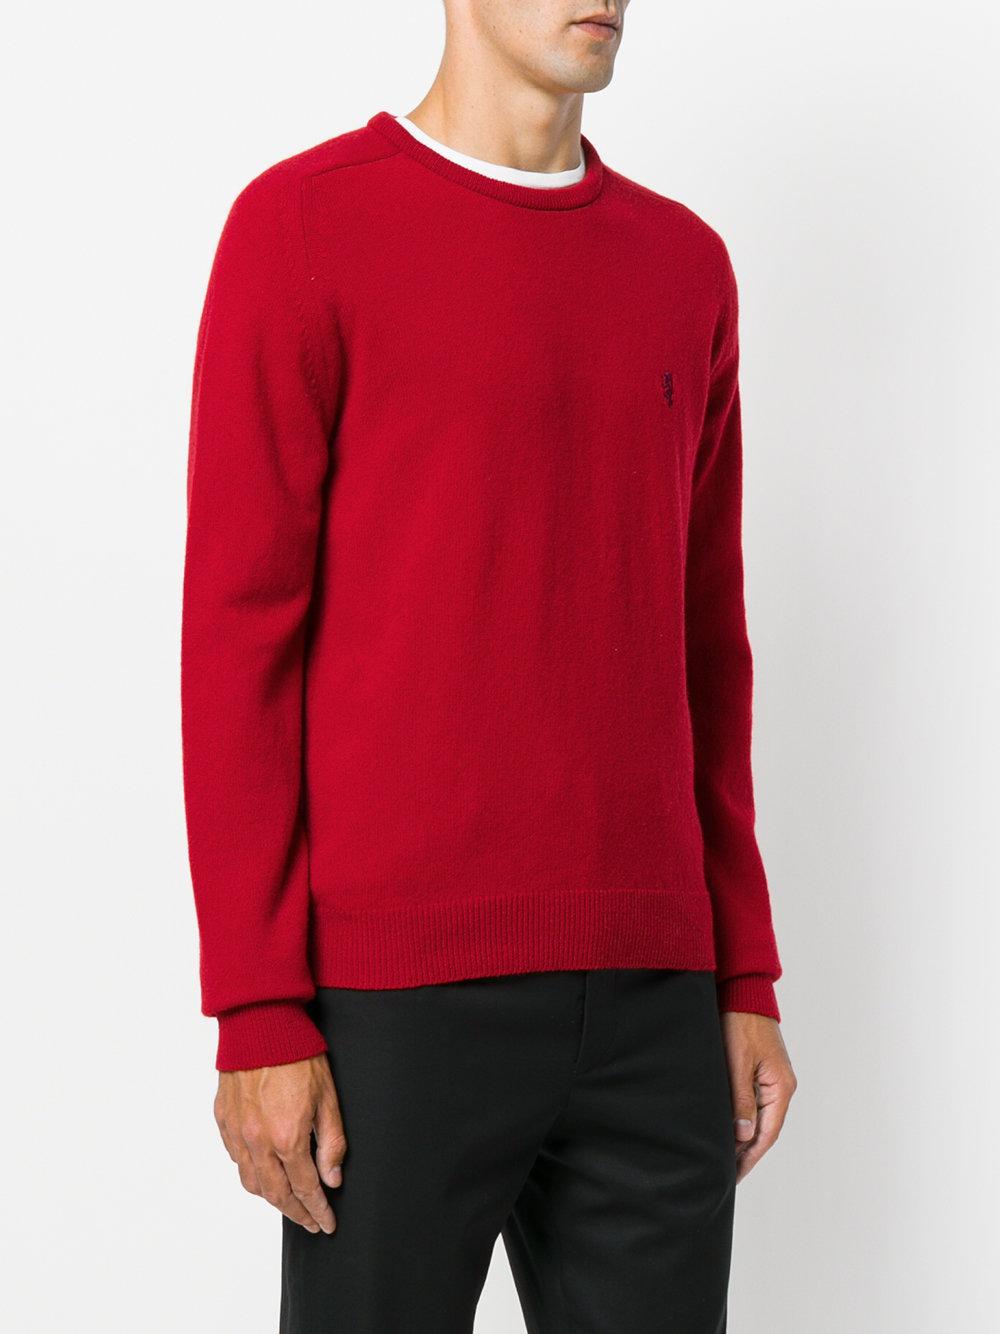 Lyst - Pringle Of Scotland Embroidered Lion Jumper in Red for Men